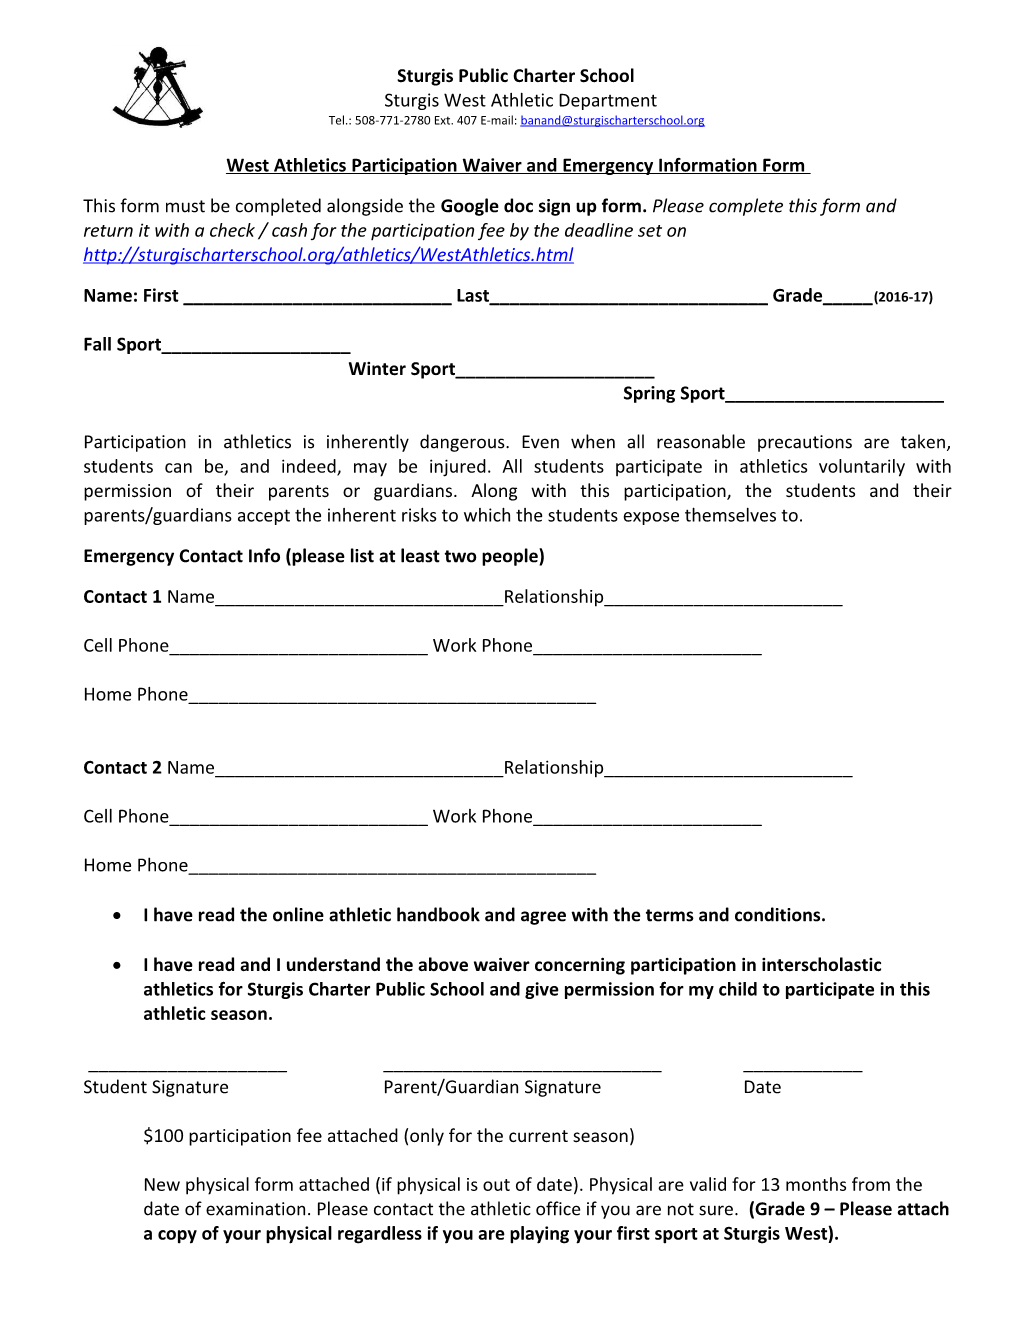 West Athletics Participation Waiver and Emergency Information Form